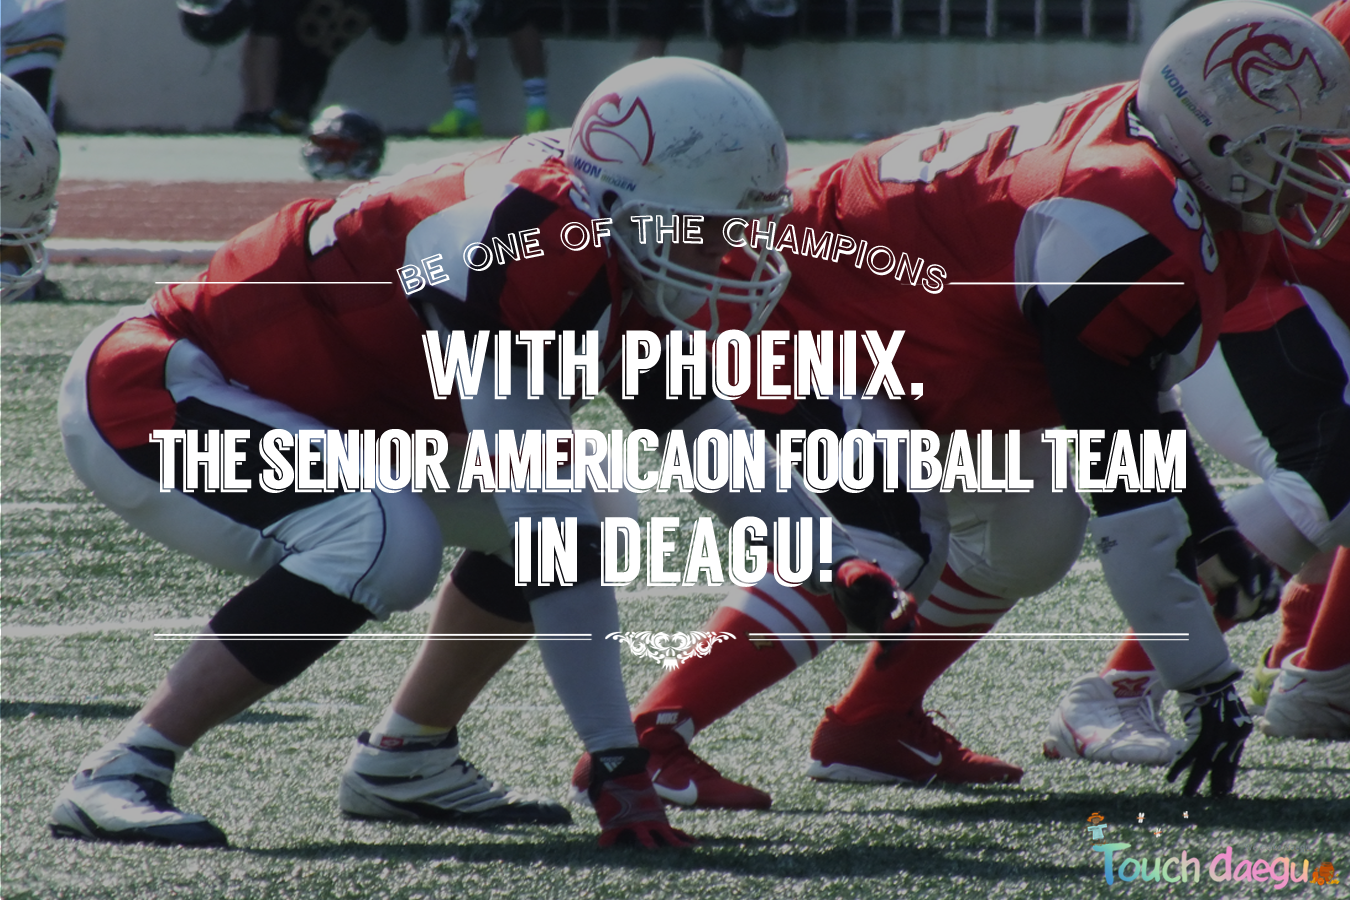 Touch Daegu: [Sports] Learn about Korean American Football and be one